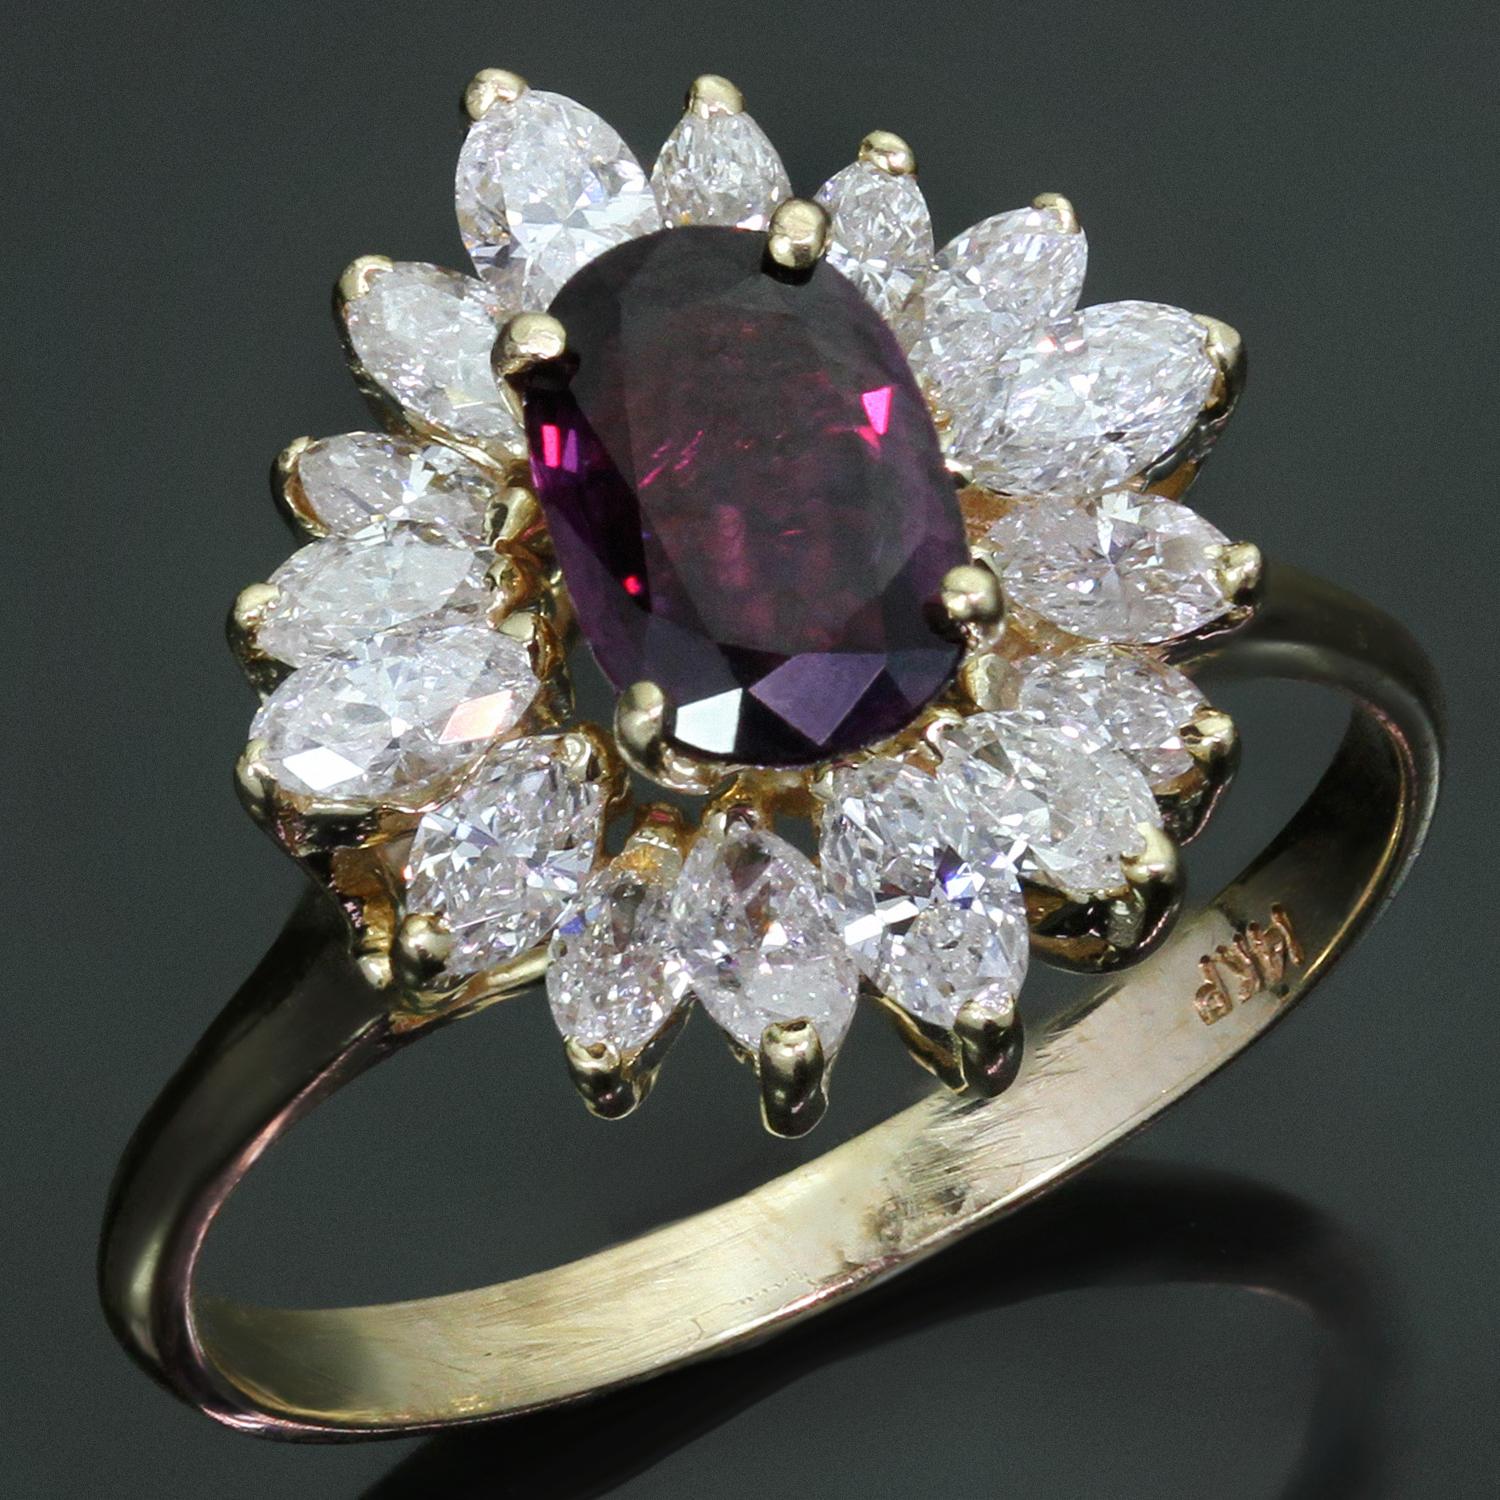 This stunning retro ballerina ring is crafted in 14k yellow gold and features a genuine purplish wine red oval garnet measuring 5.0mm x 7.0 mm and weighing 2.0 carats, surrounded with marquise-cut H-I SI1 diamonds weighing an estimated 1.25 carats.